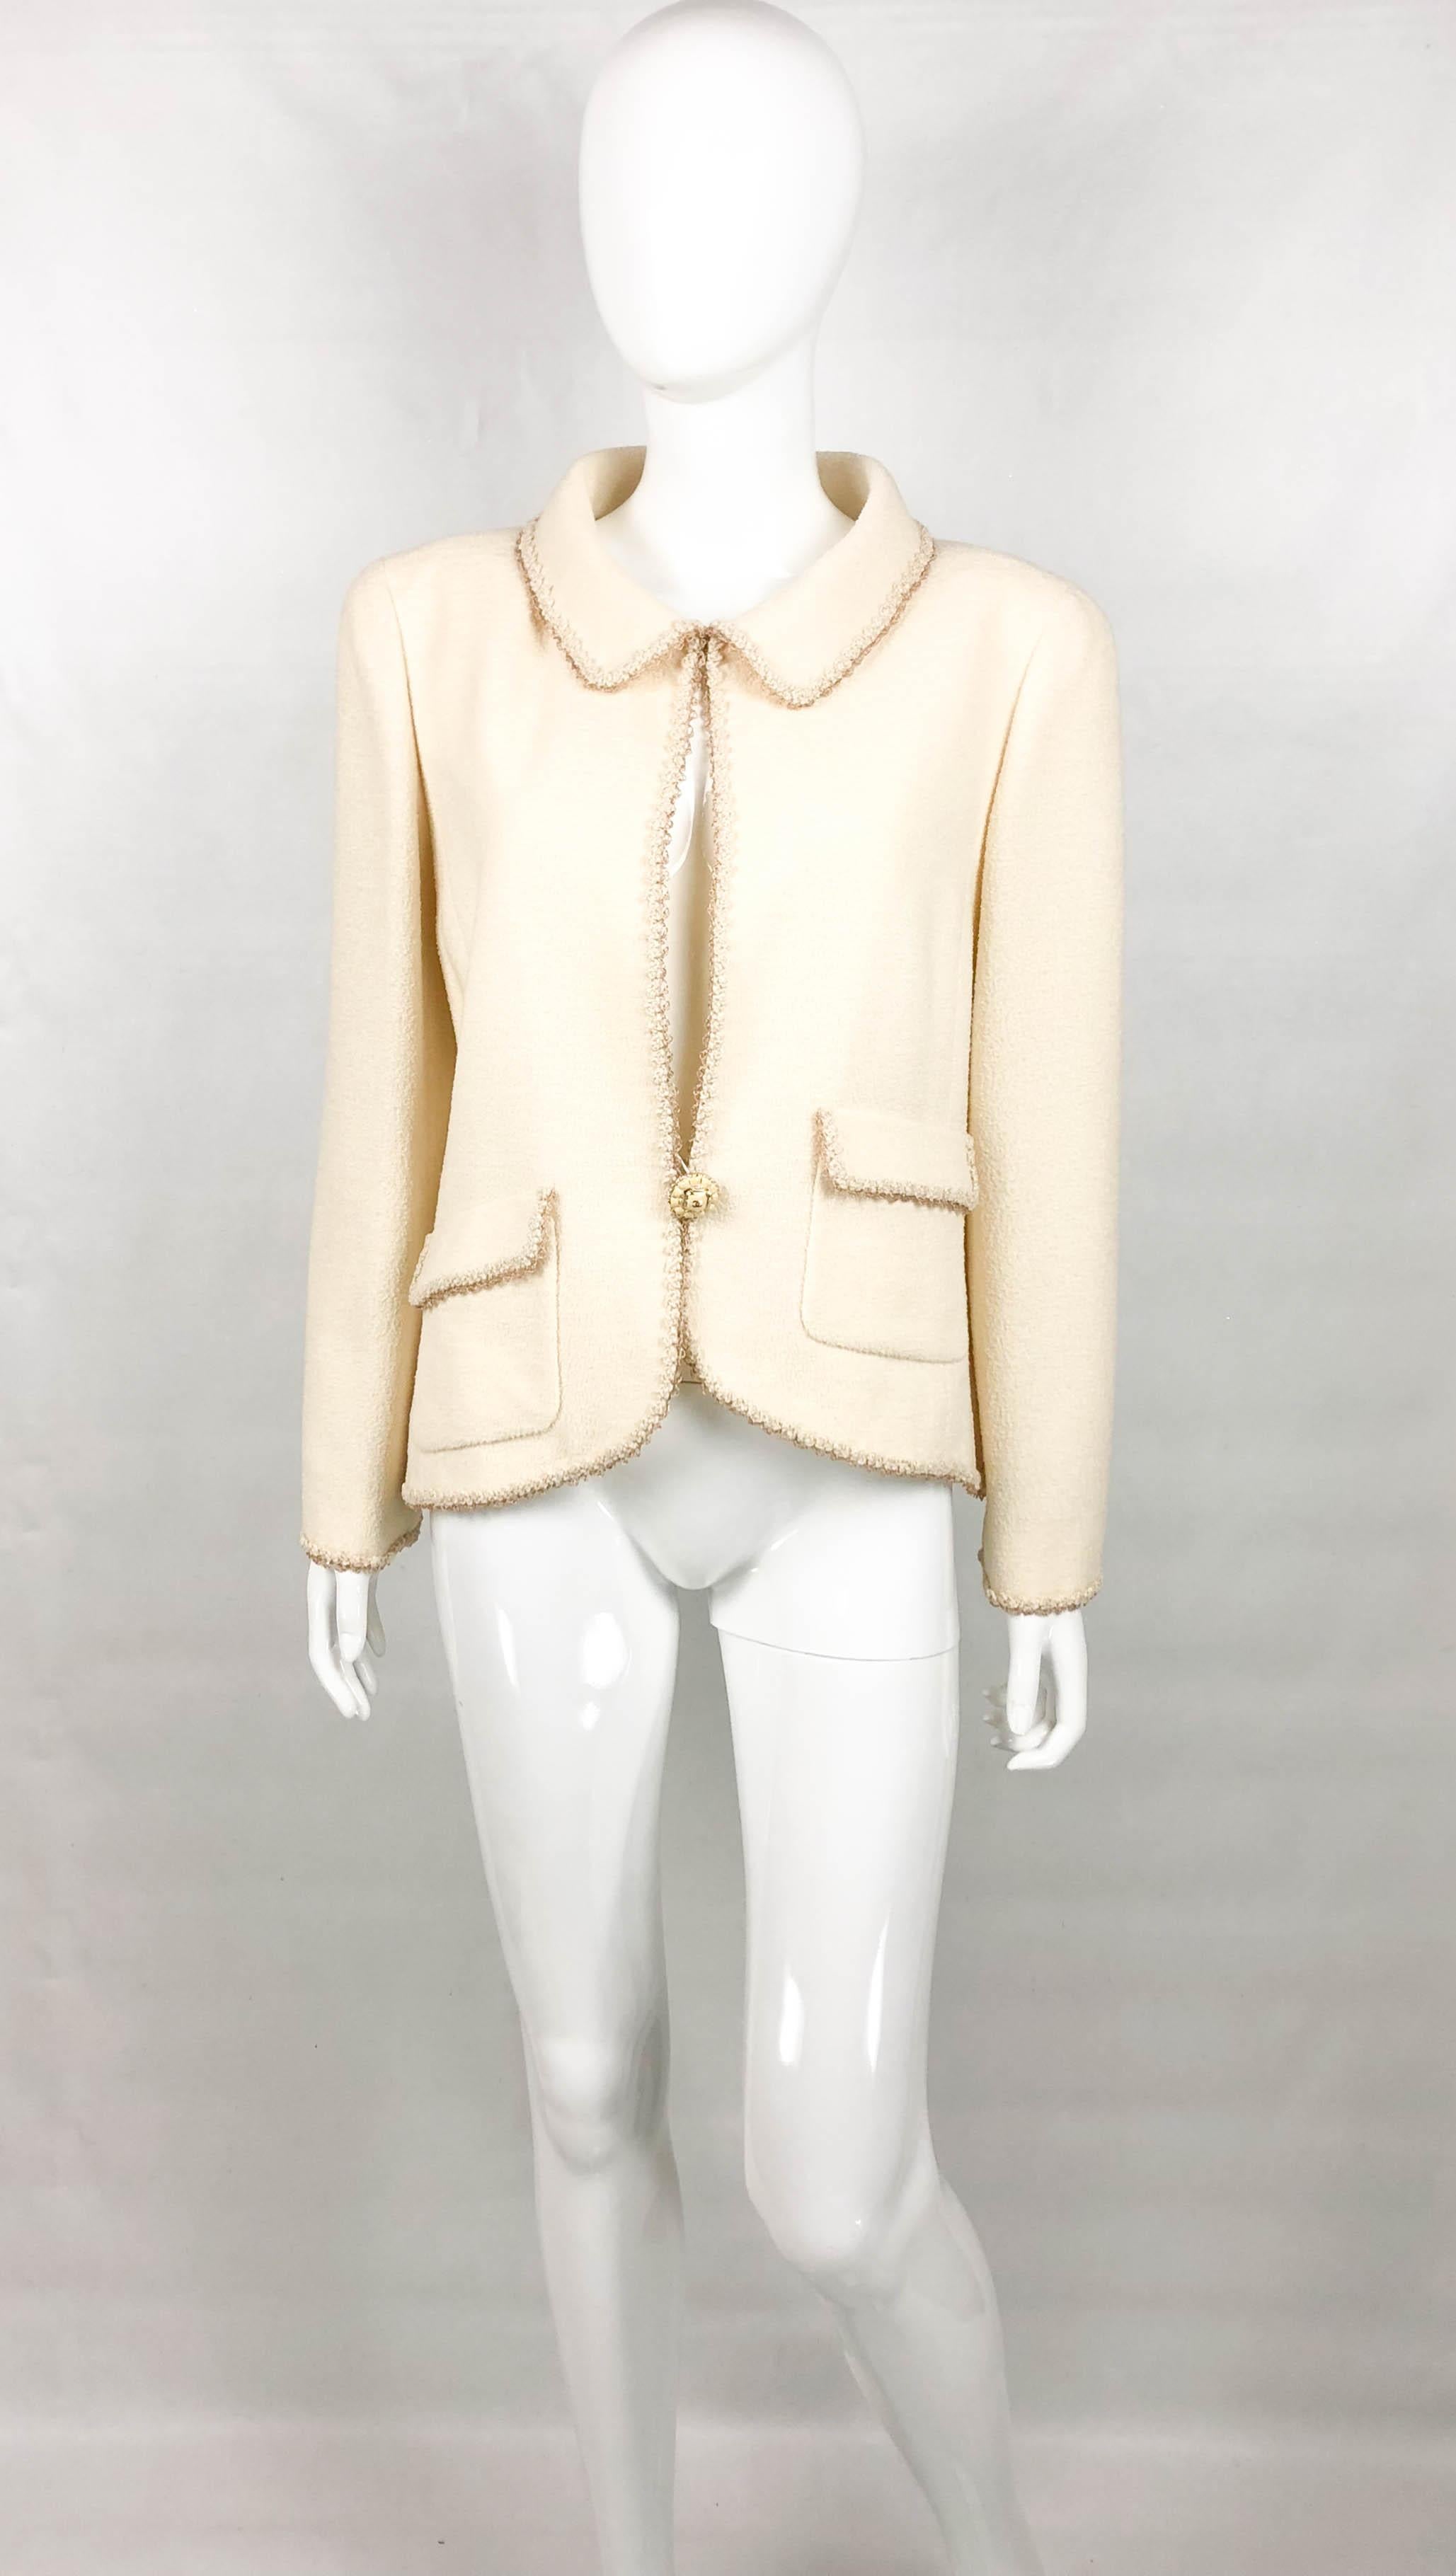 2010 Chanel Unworn Runway Look Cream Jacket With Gold Thread Trim In New Condition For Sale In London, Chelsea